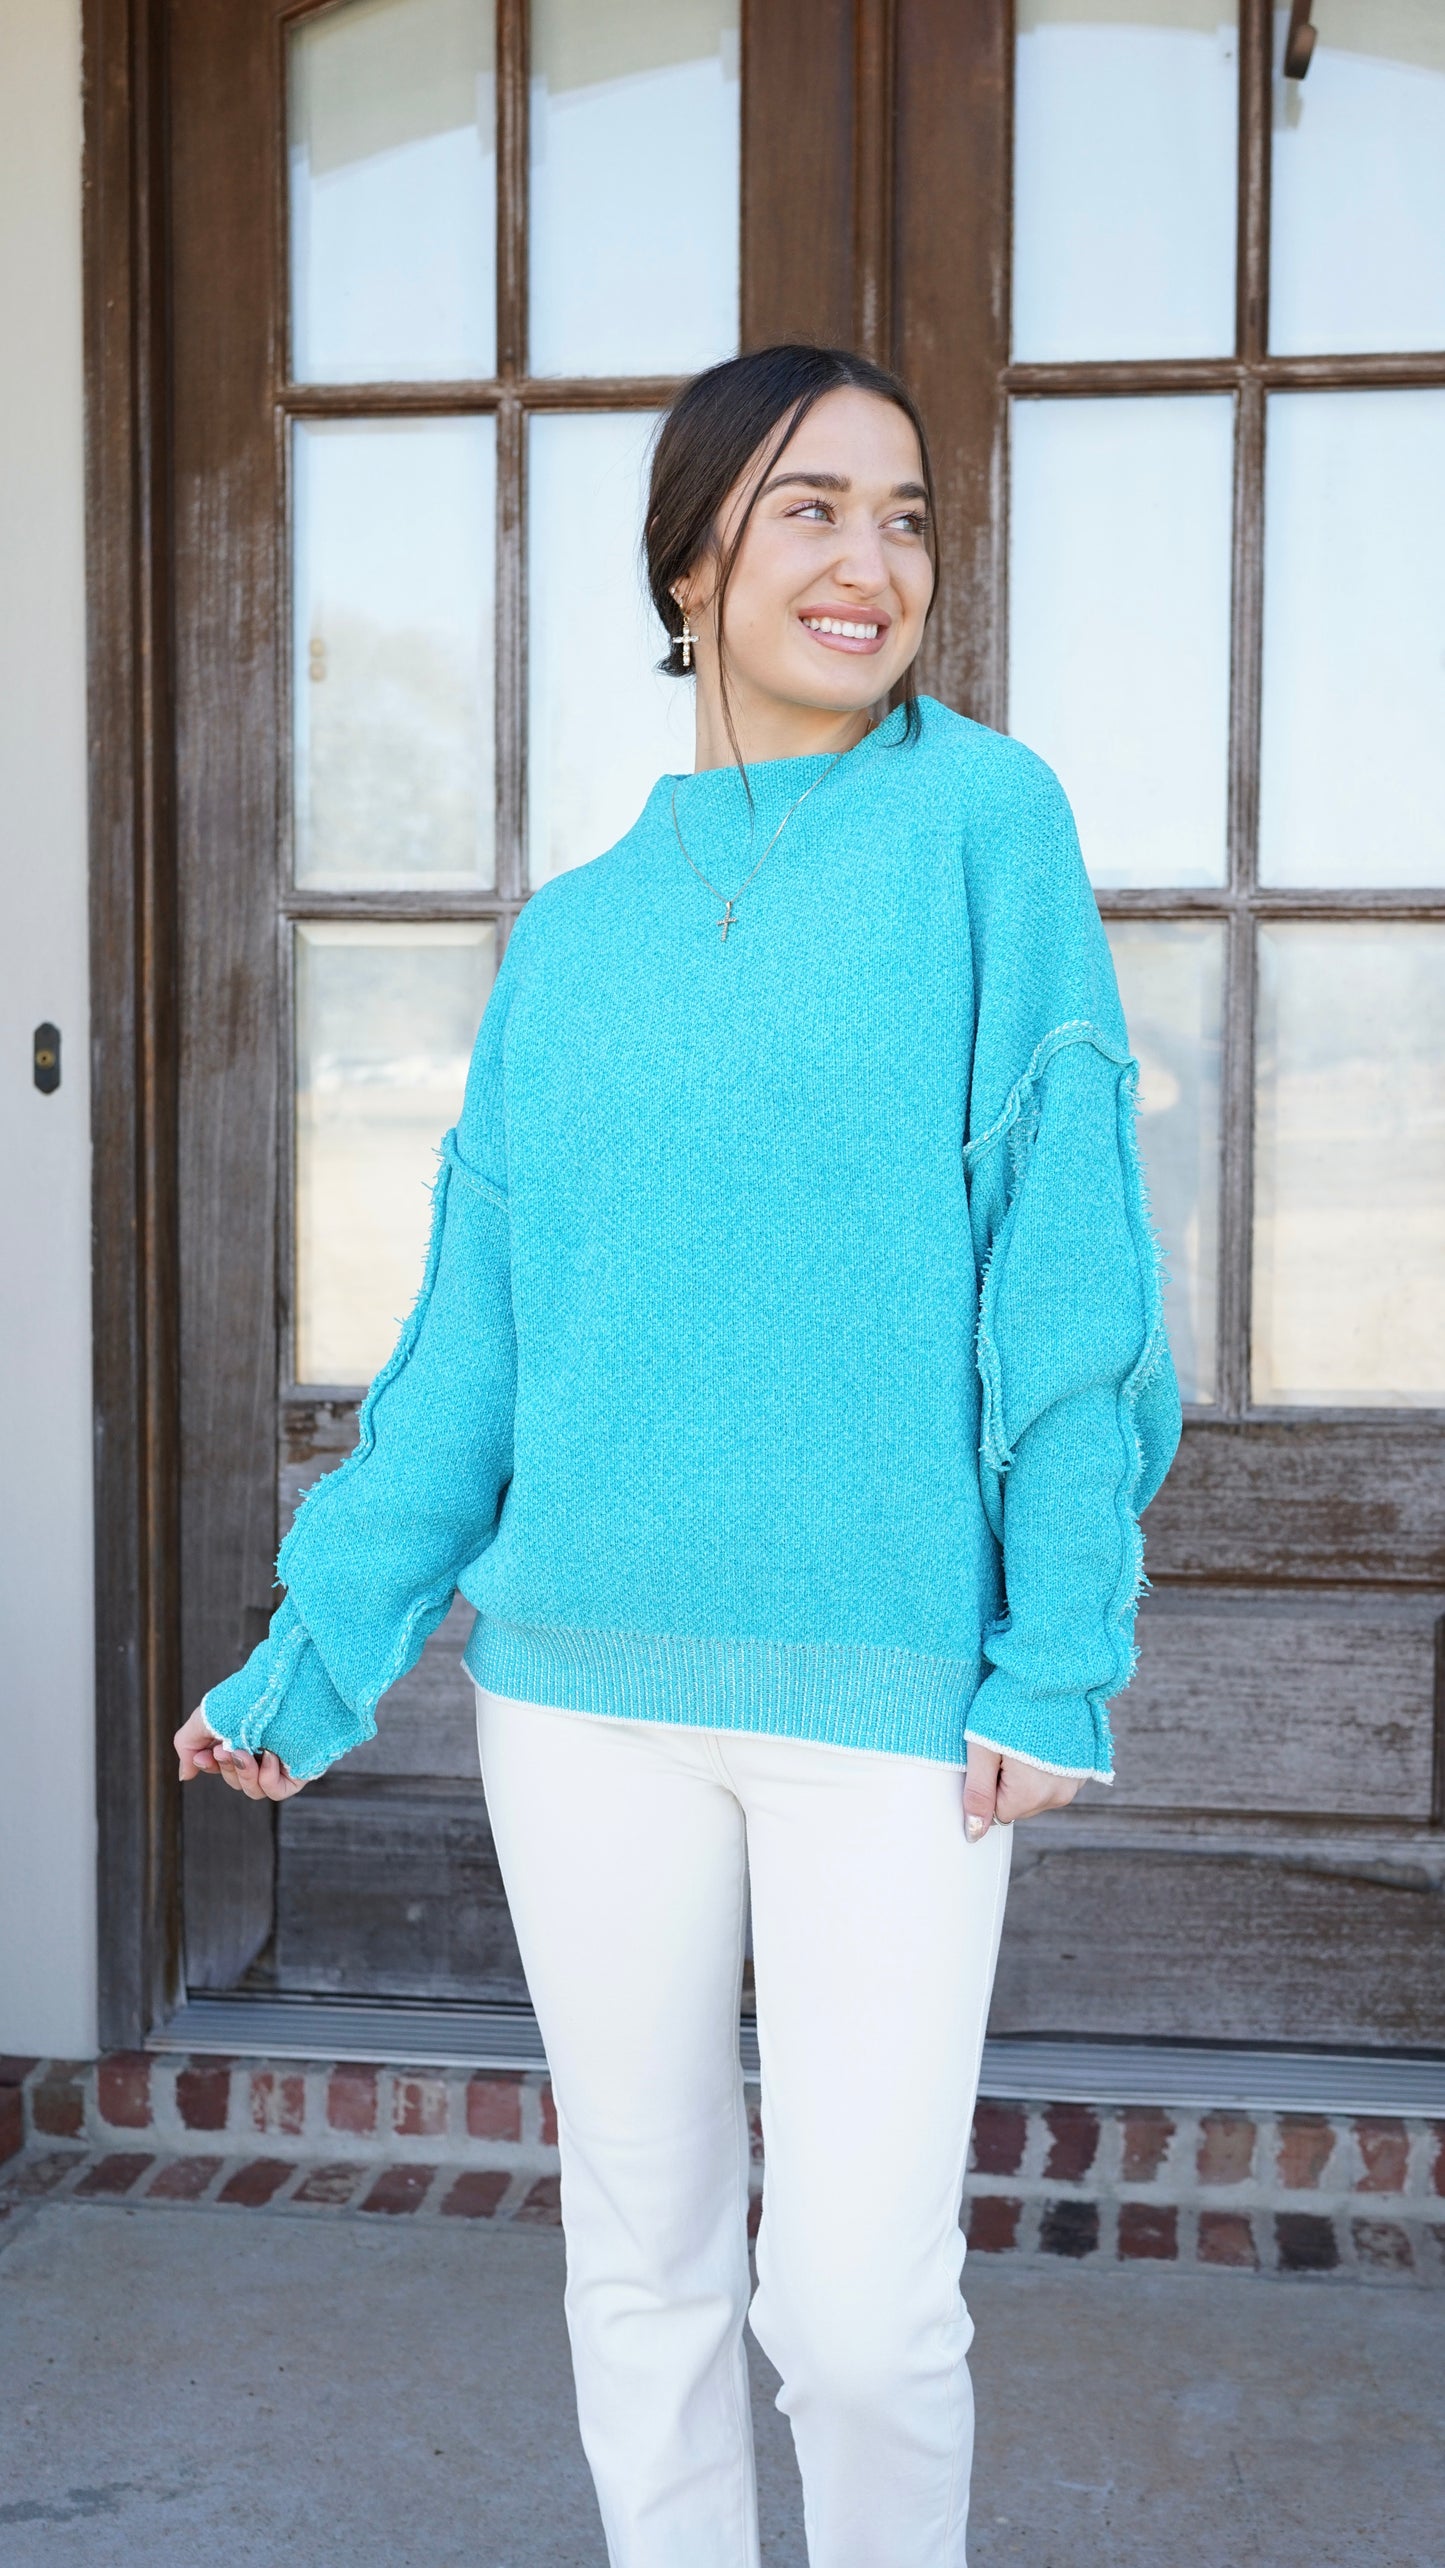 Snuggly Days Teal Sweater